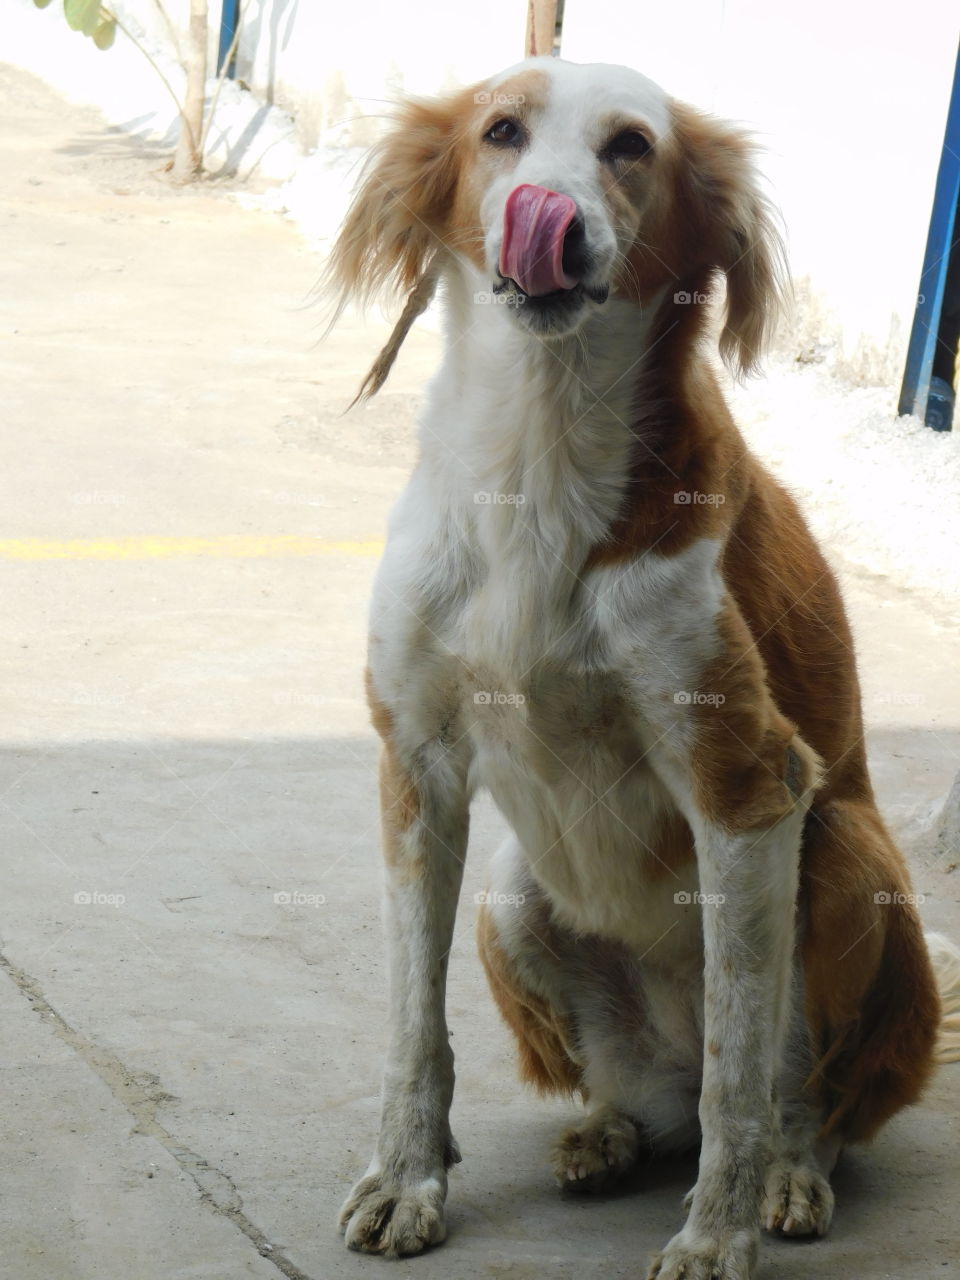 Indian dog with white and brown colour sitting on. Face expression is very funny.